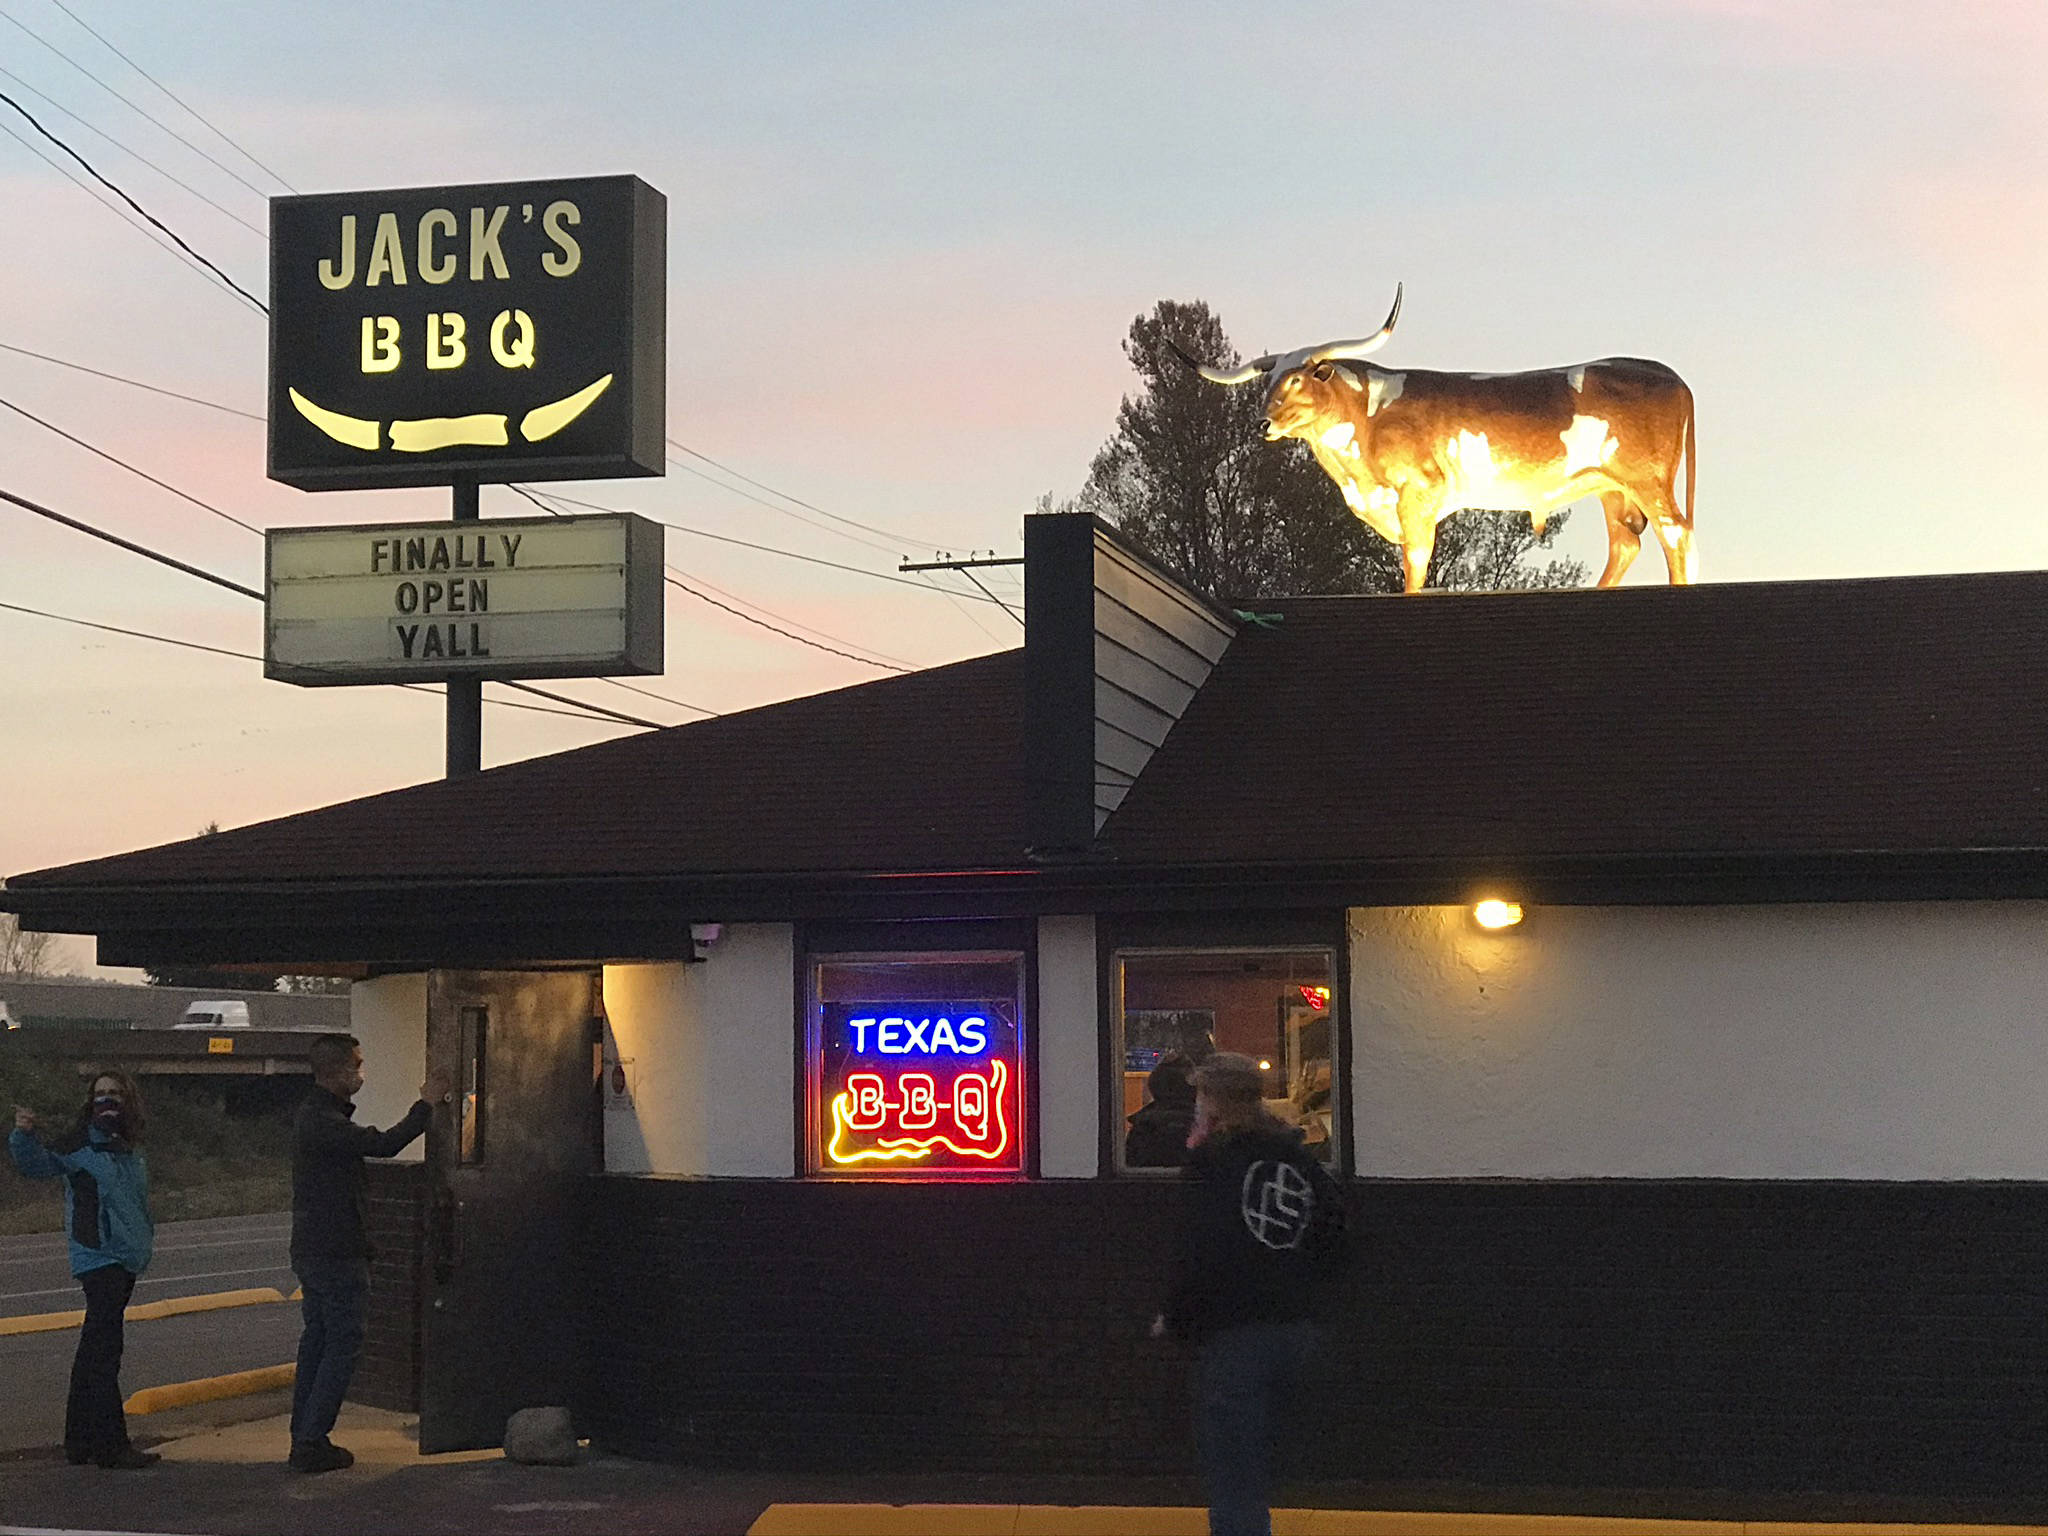 Jack’s BBQ opened last month on West Valley Highway in Algona. Courtesy photo